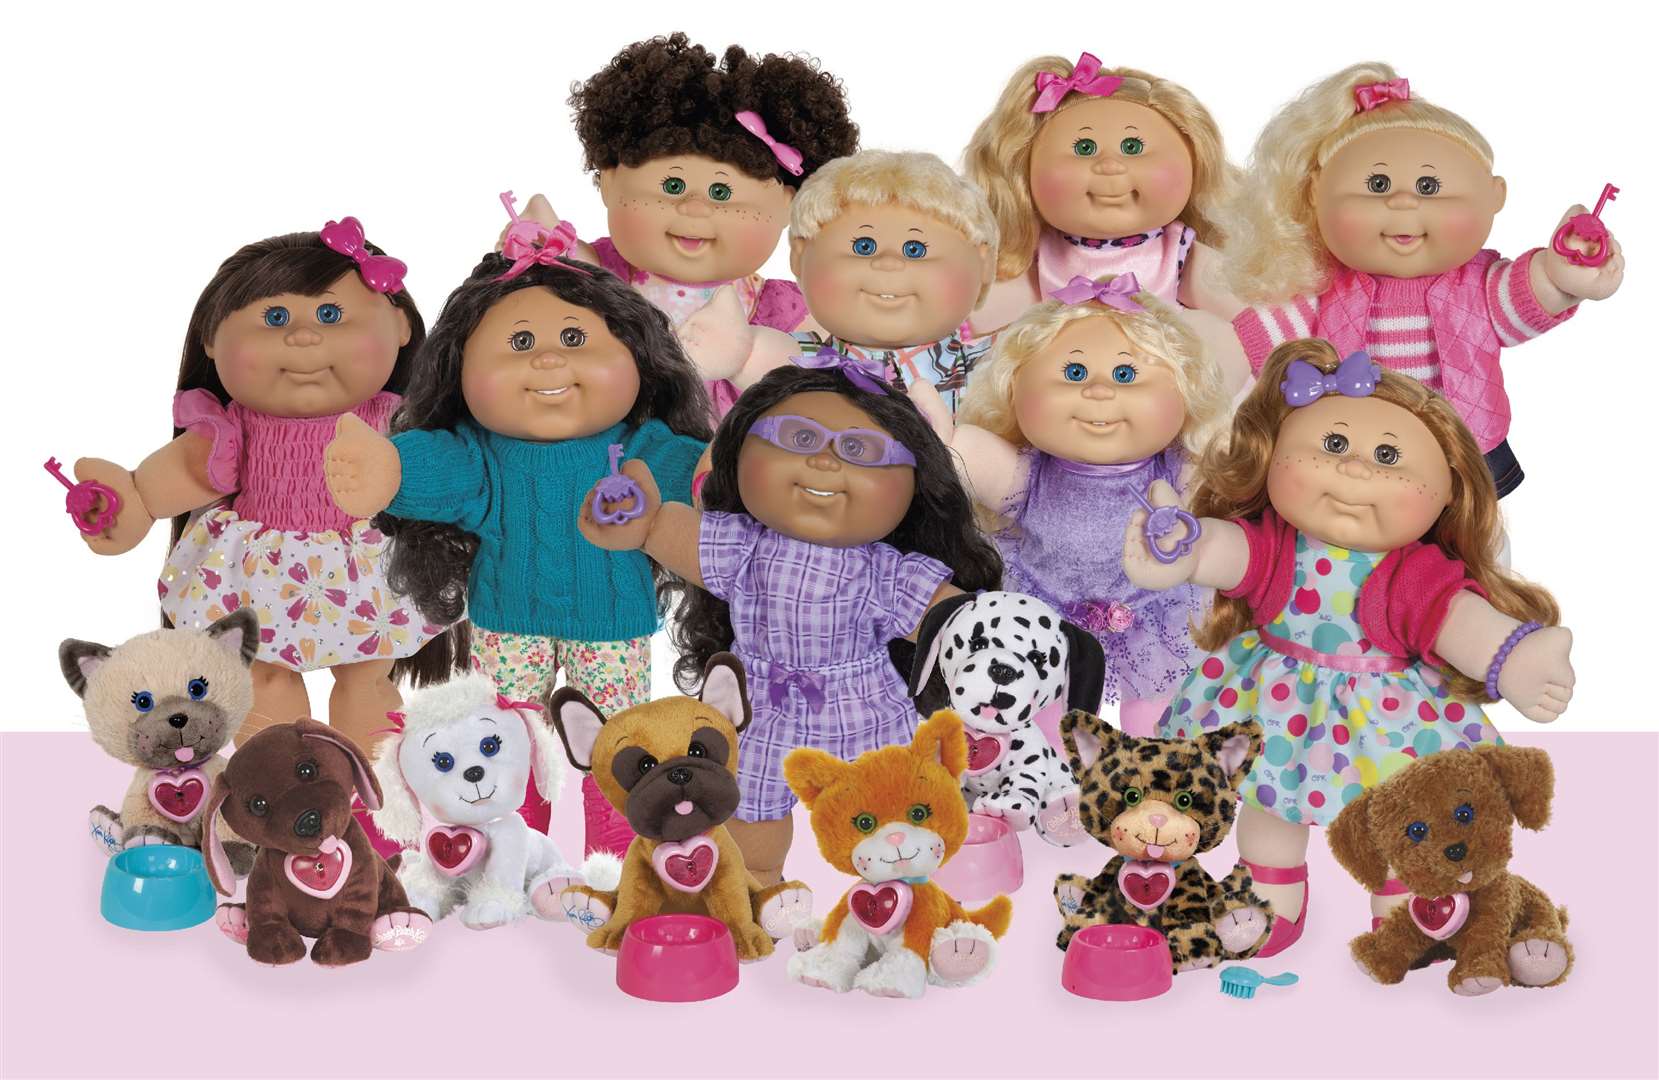 The 2019 collection of Cabbage Patch Kids based on the top toy from the eighties